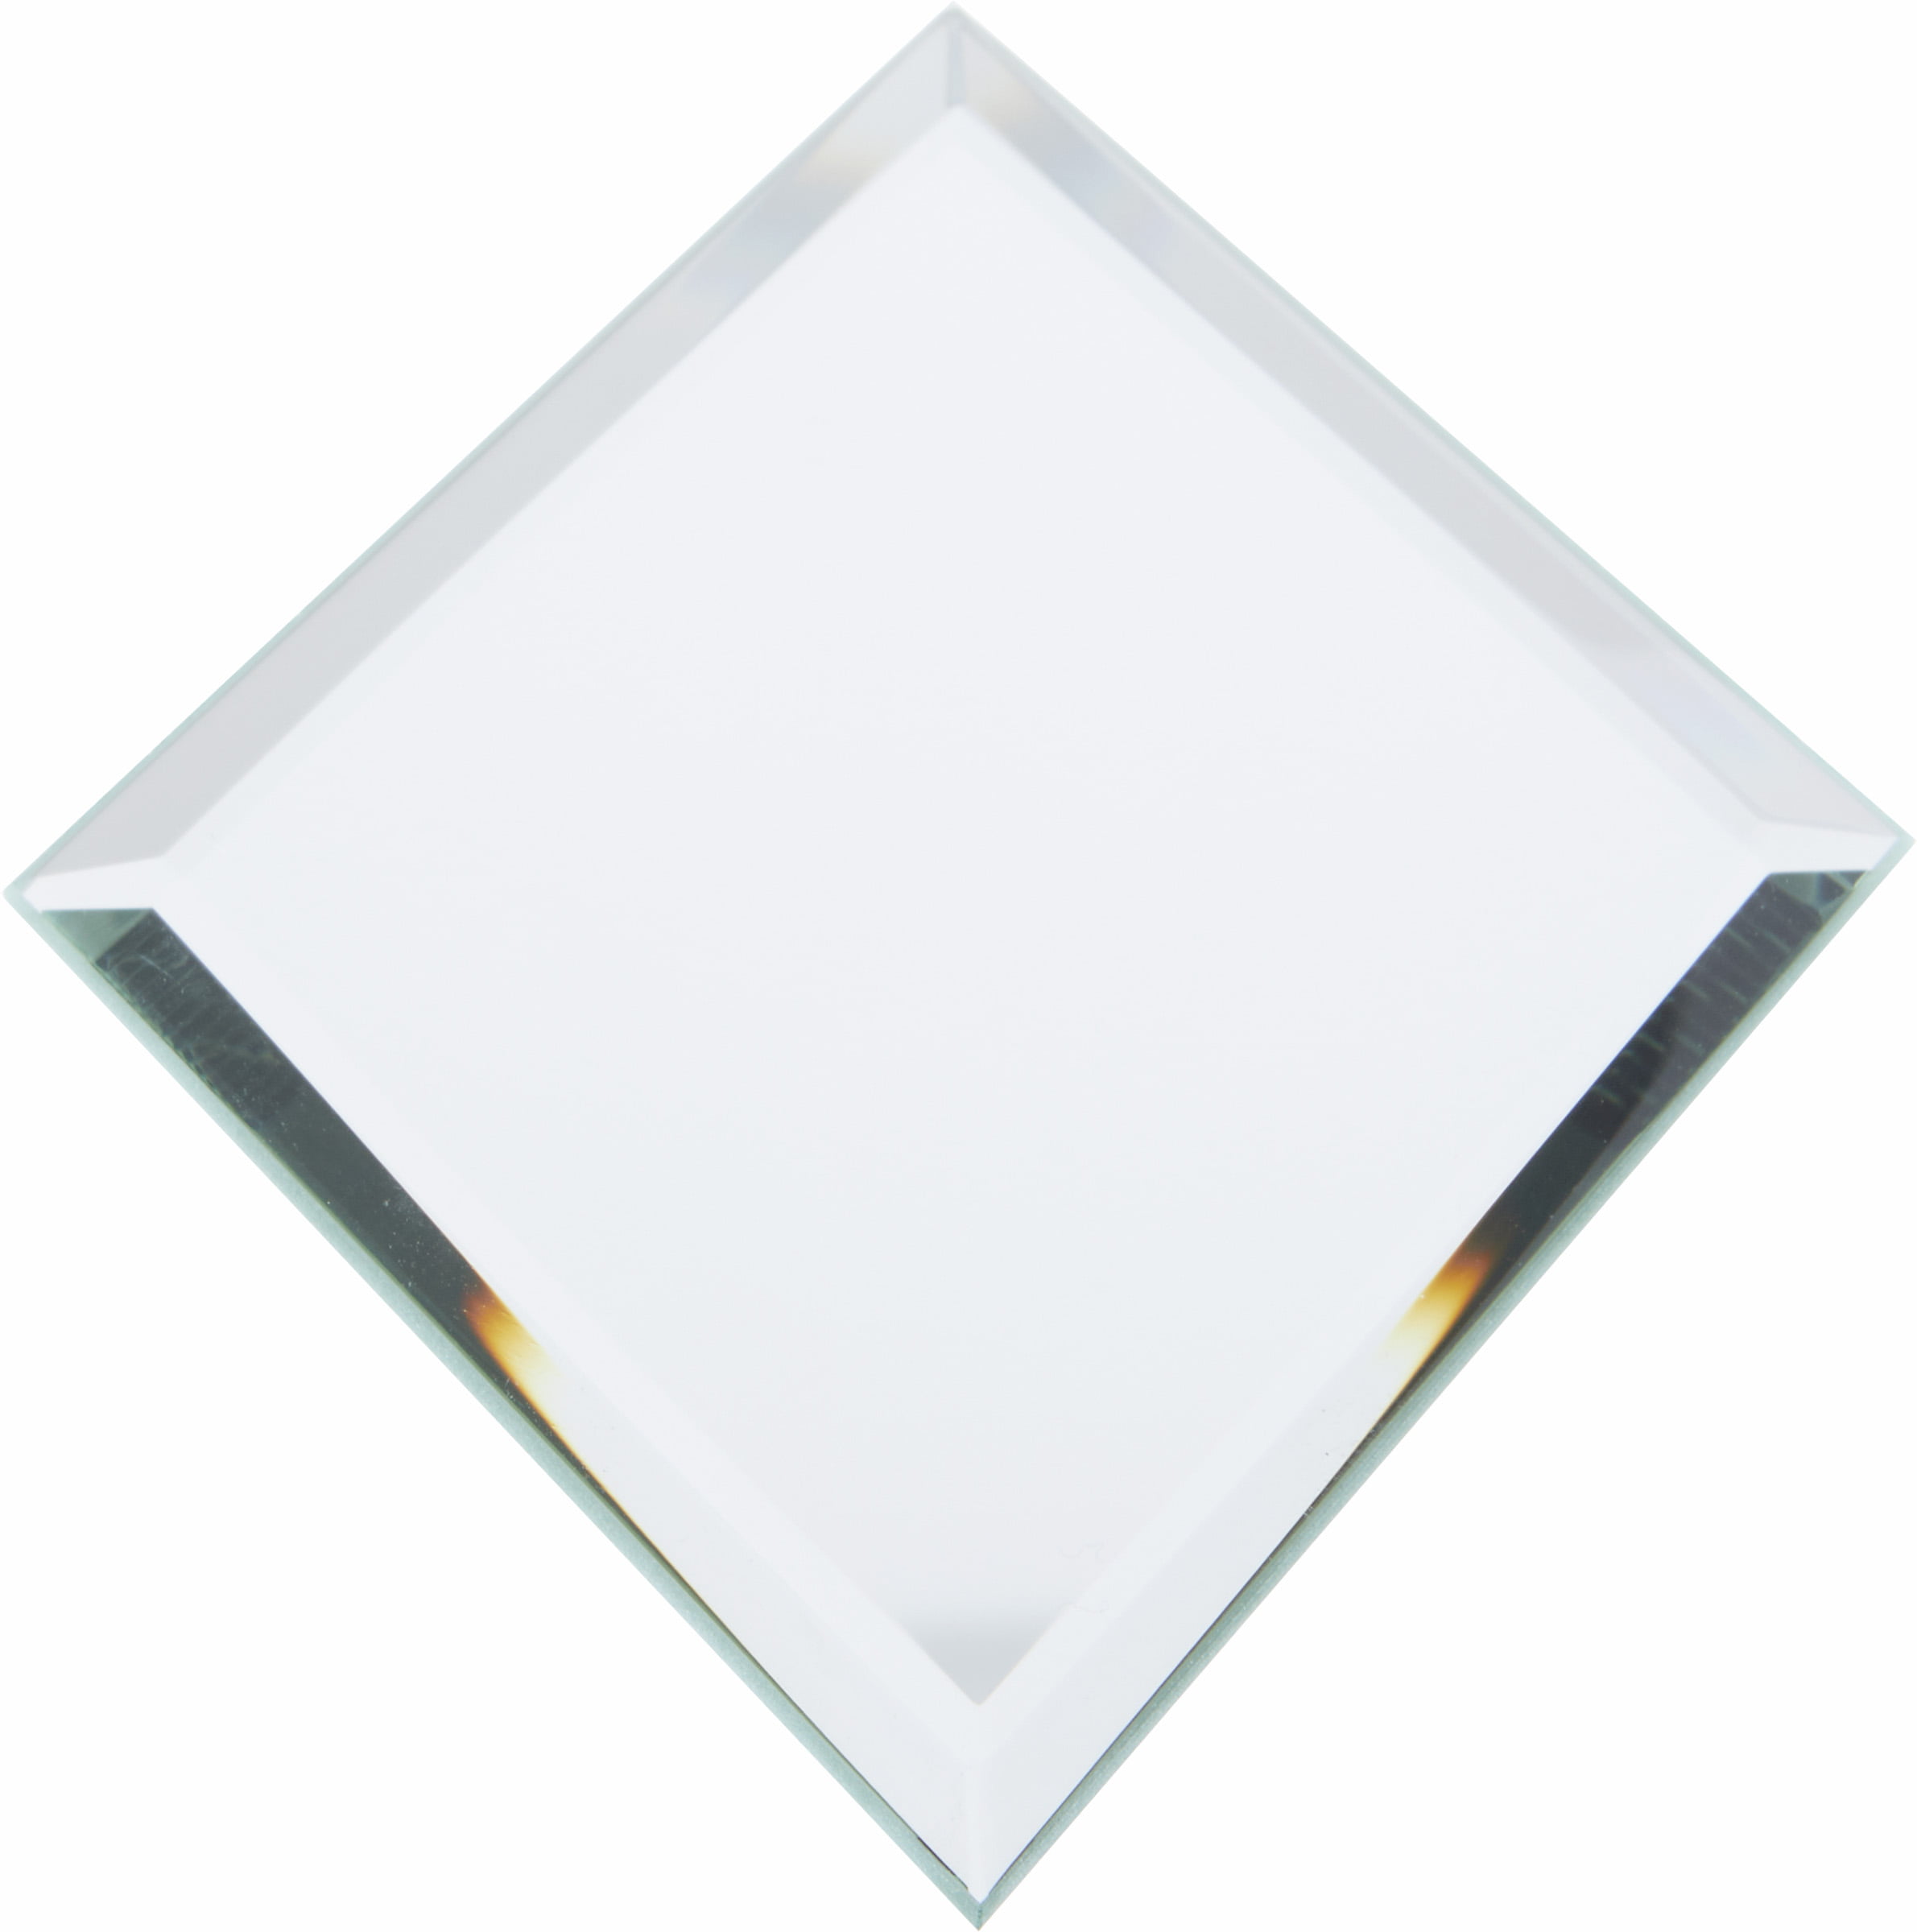 Plymor Moon 3mm Beveled Scalloped Glass Mirror 6 inch x 6 inch 